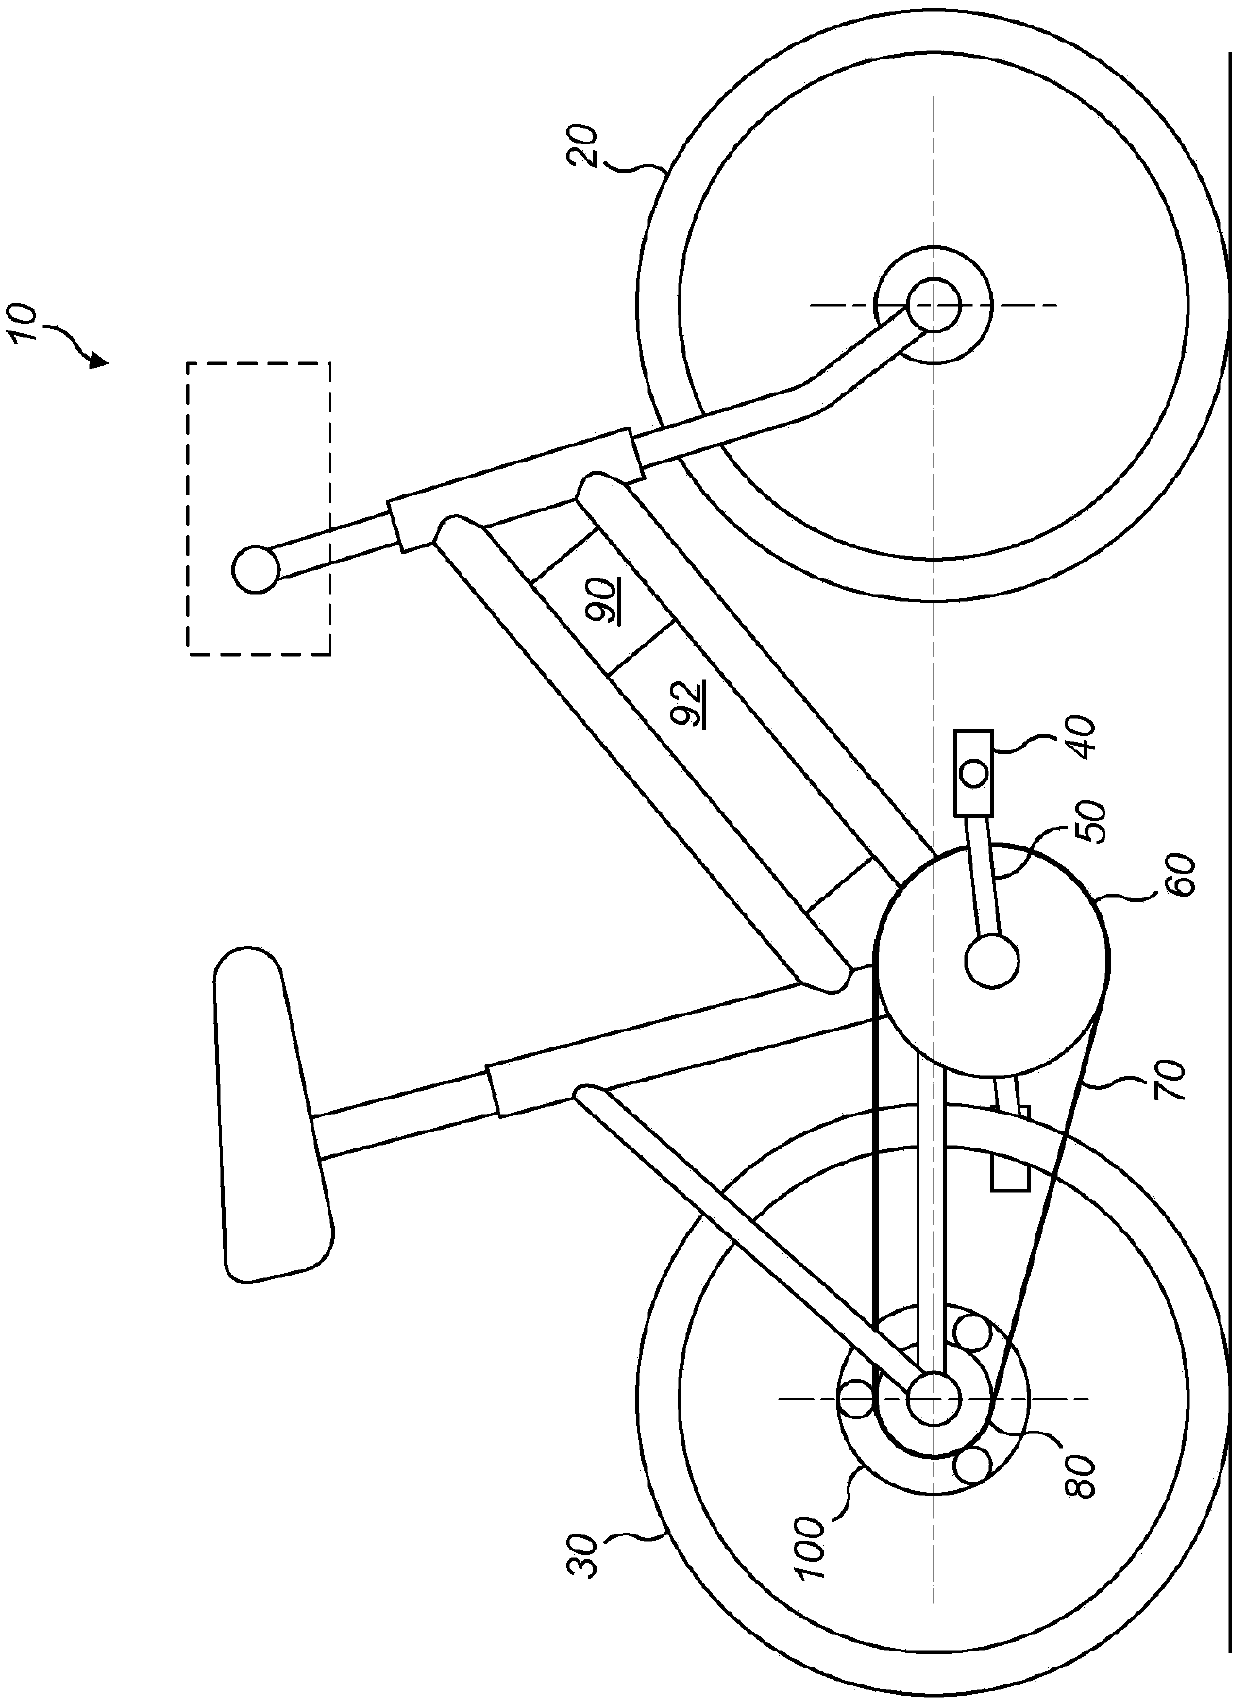 A method of operating a pedal cycle having an electro-mechanical drive arrangement